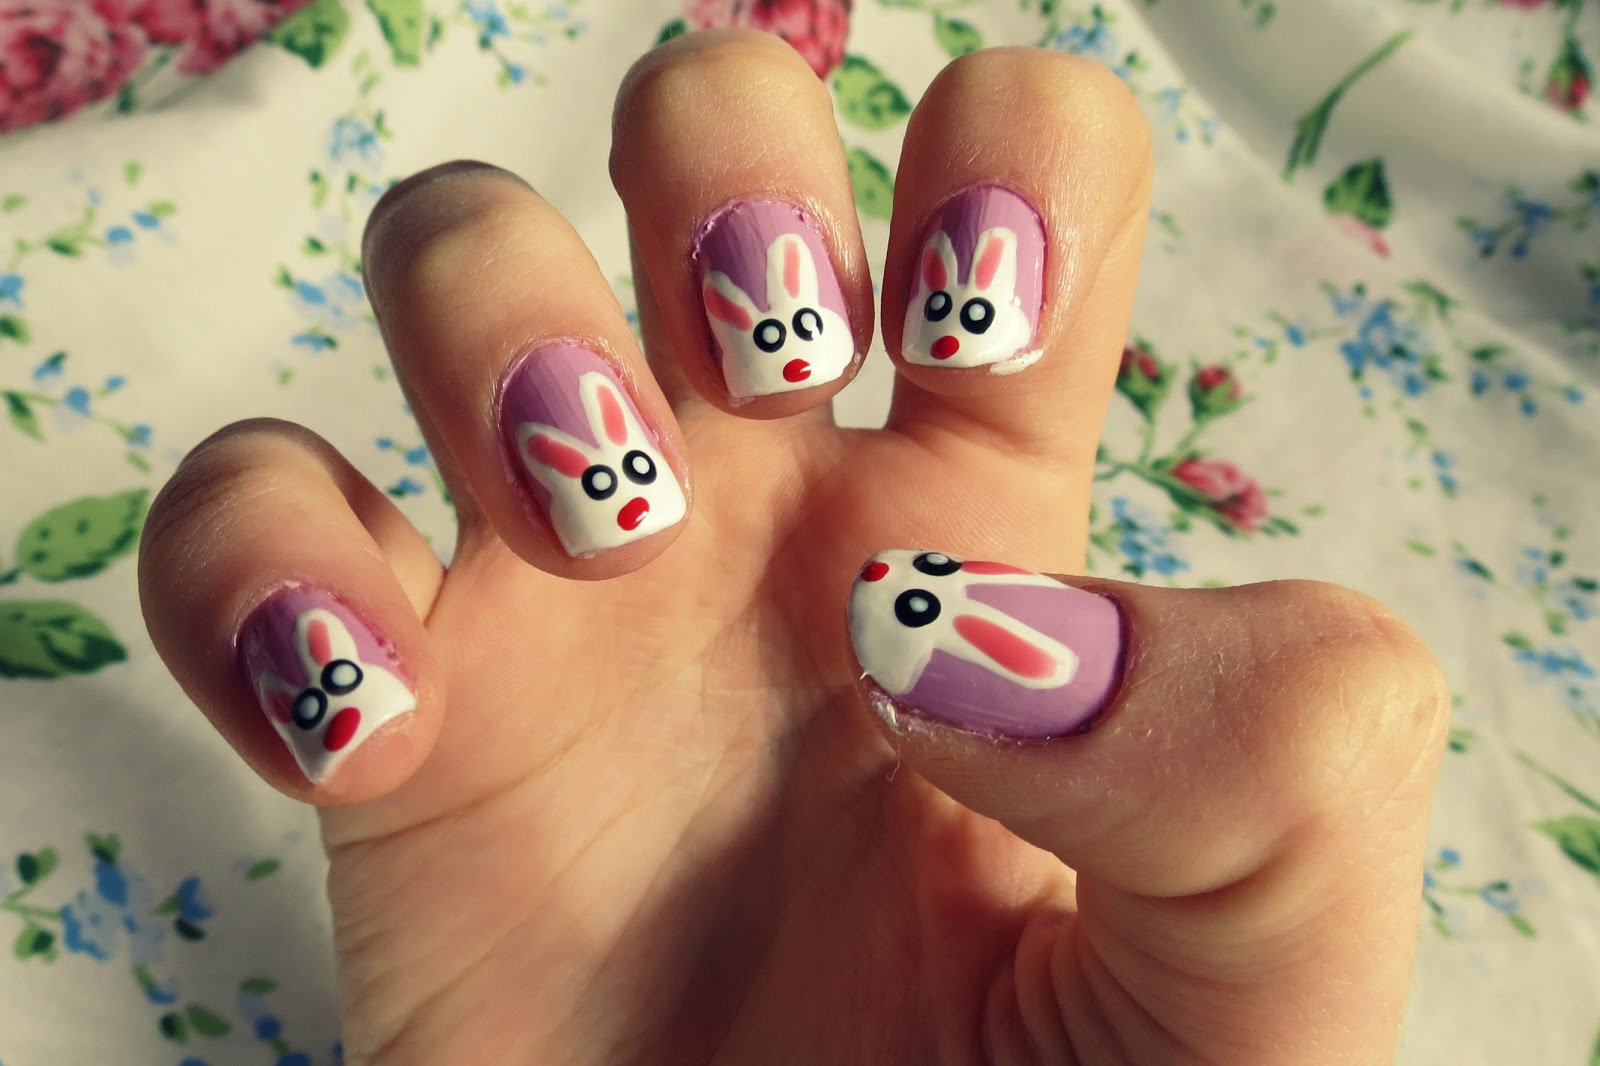 8. Easter Bunny Nail Art on Pinterest - wide 7